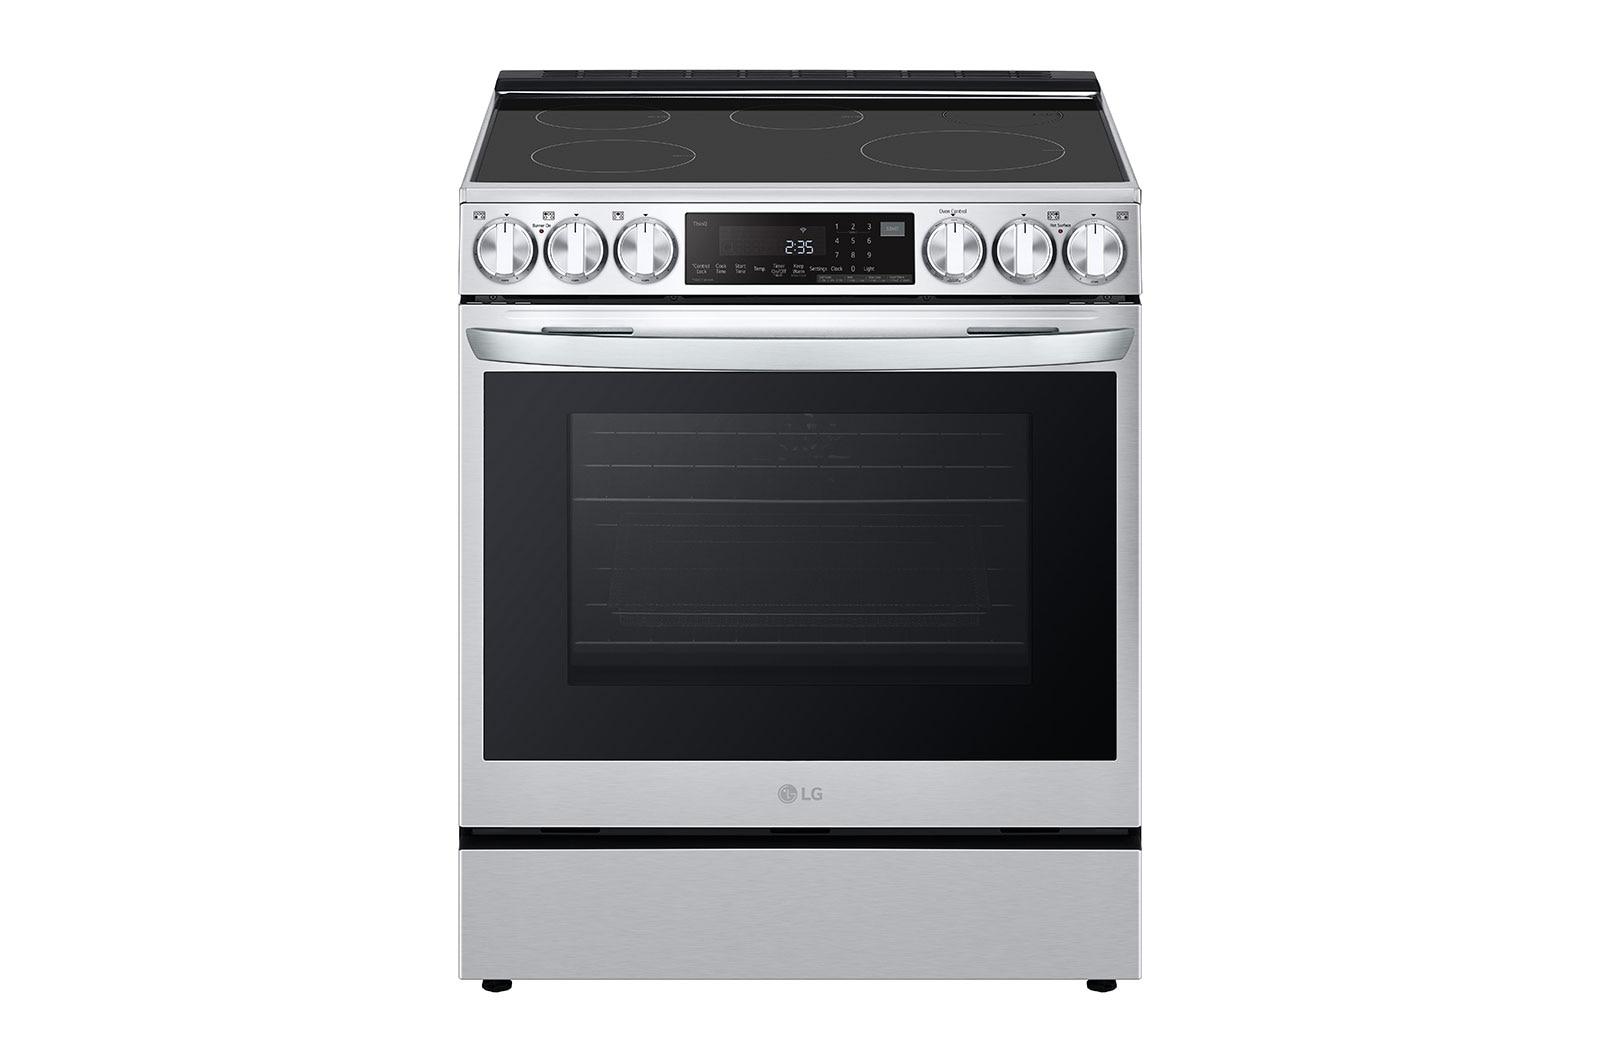 Lg 6.3 cu. ft. Smart Induction Slide-in Range with InstaView®, ProBake Convection®, Air Fry, and Air Sous Vide